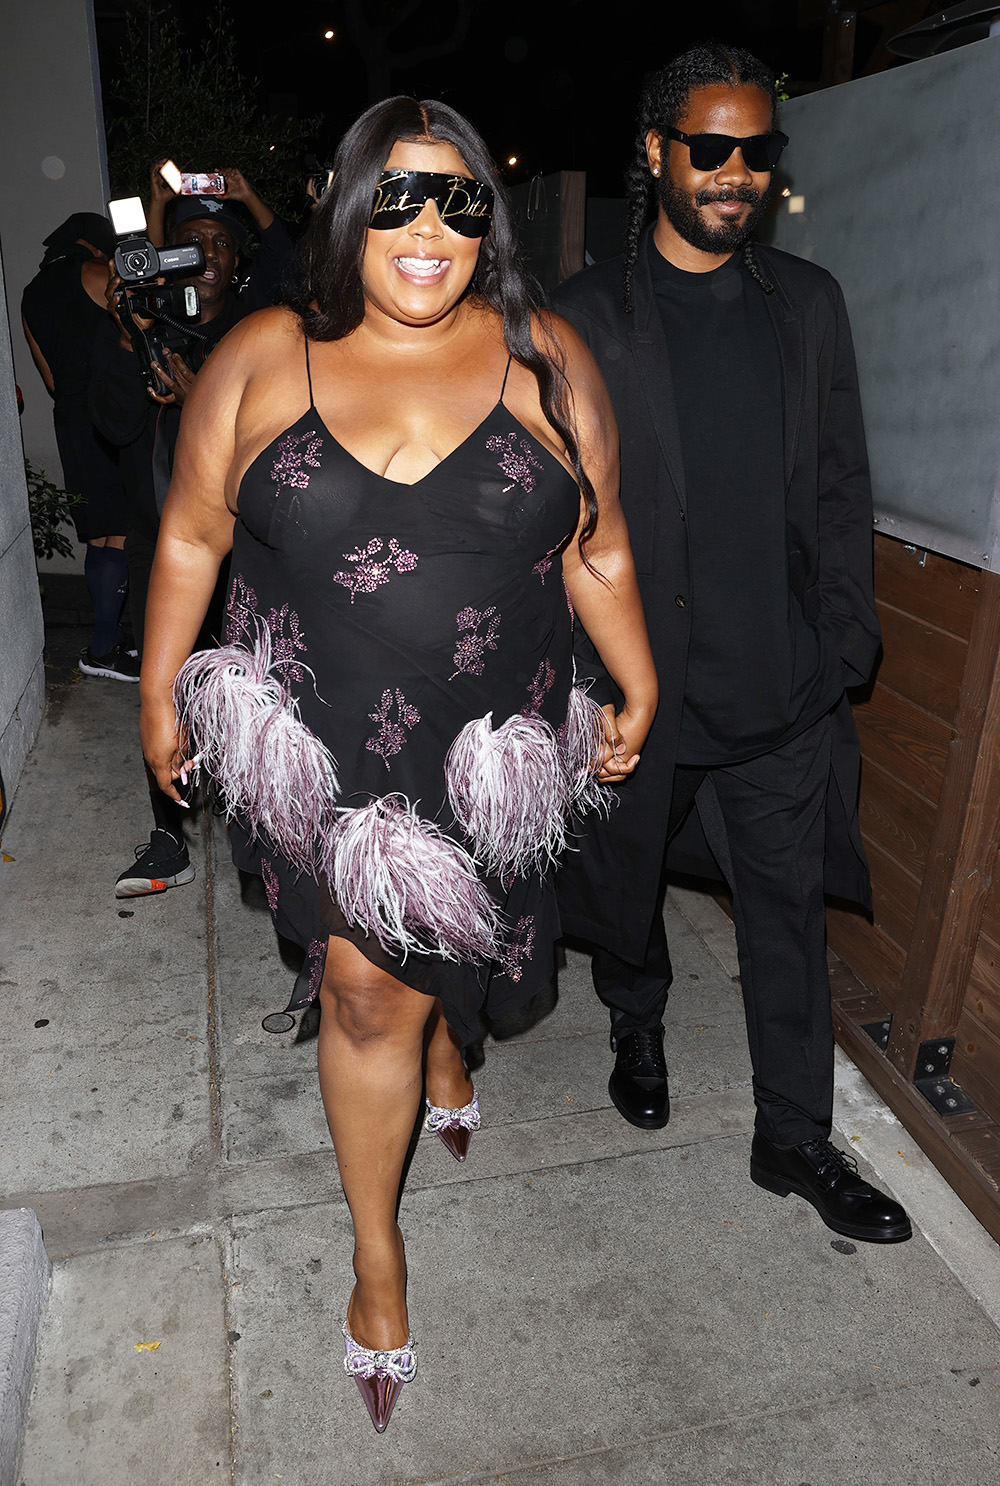 Singer, Lizzo seen arriving to celebrate her 35th birthday on a party bus with friends at Craigs Restaurant in West Hollywood.Photo: LizzoRef: SPL5306047 270422 Mr. Photoman / SplashNews.comSplash News and PicturesUSA: +1 310-525-5808London: +44 (0)20 8126 1009Berlin: +49 175 3764 166photodesk@splashnews.comGlobal rights, no rights for Turkey